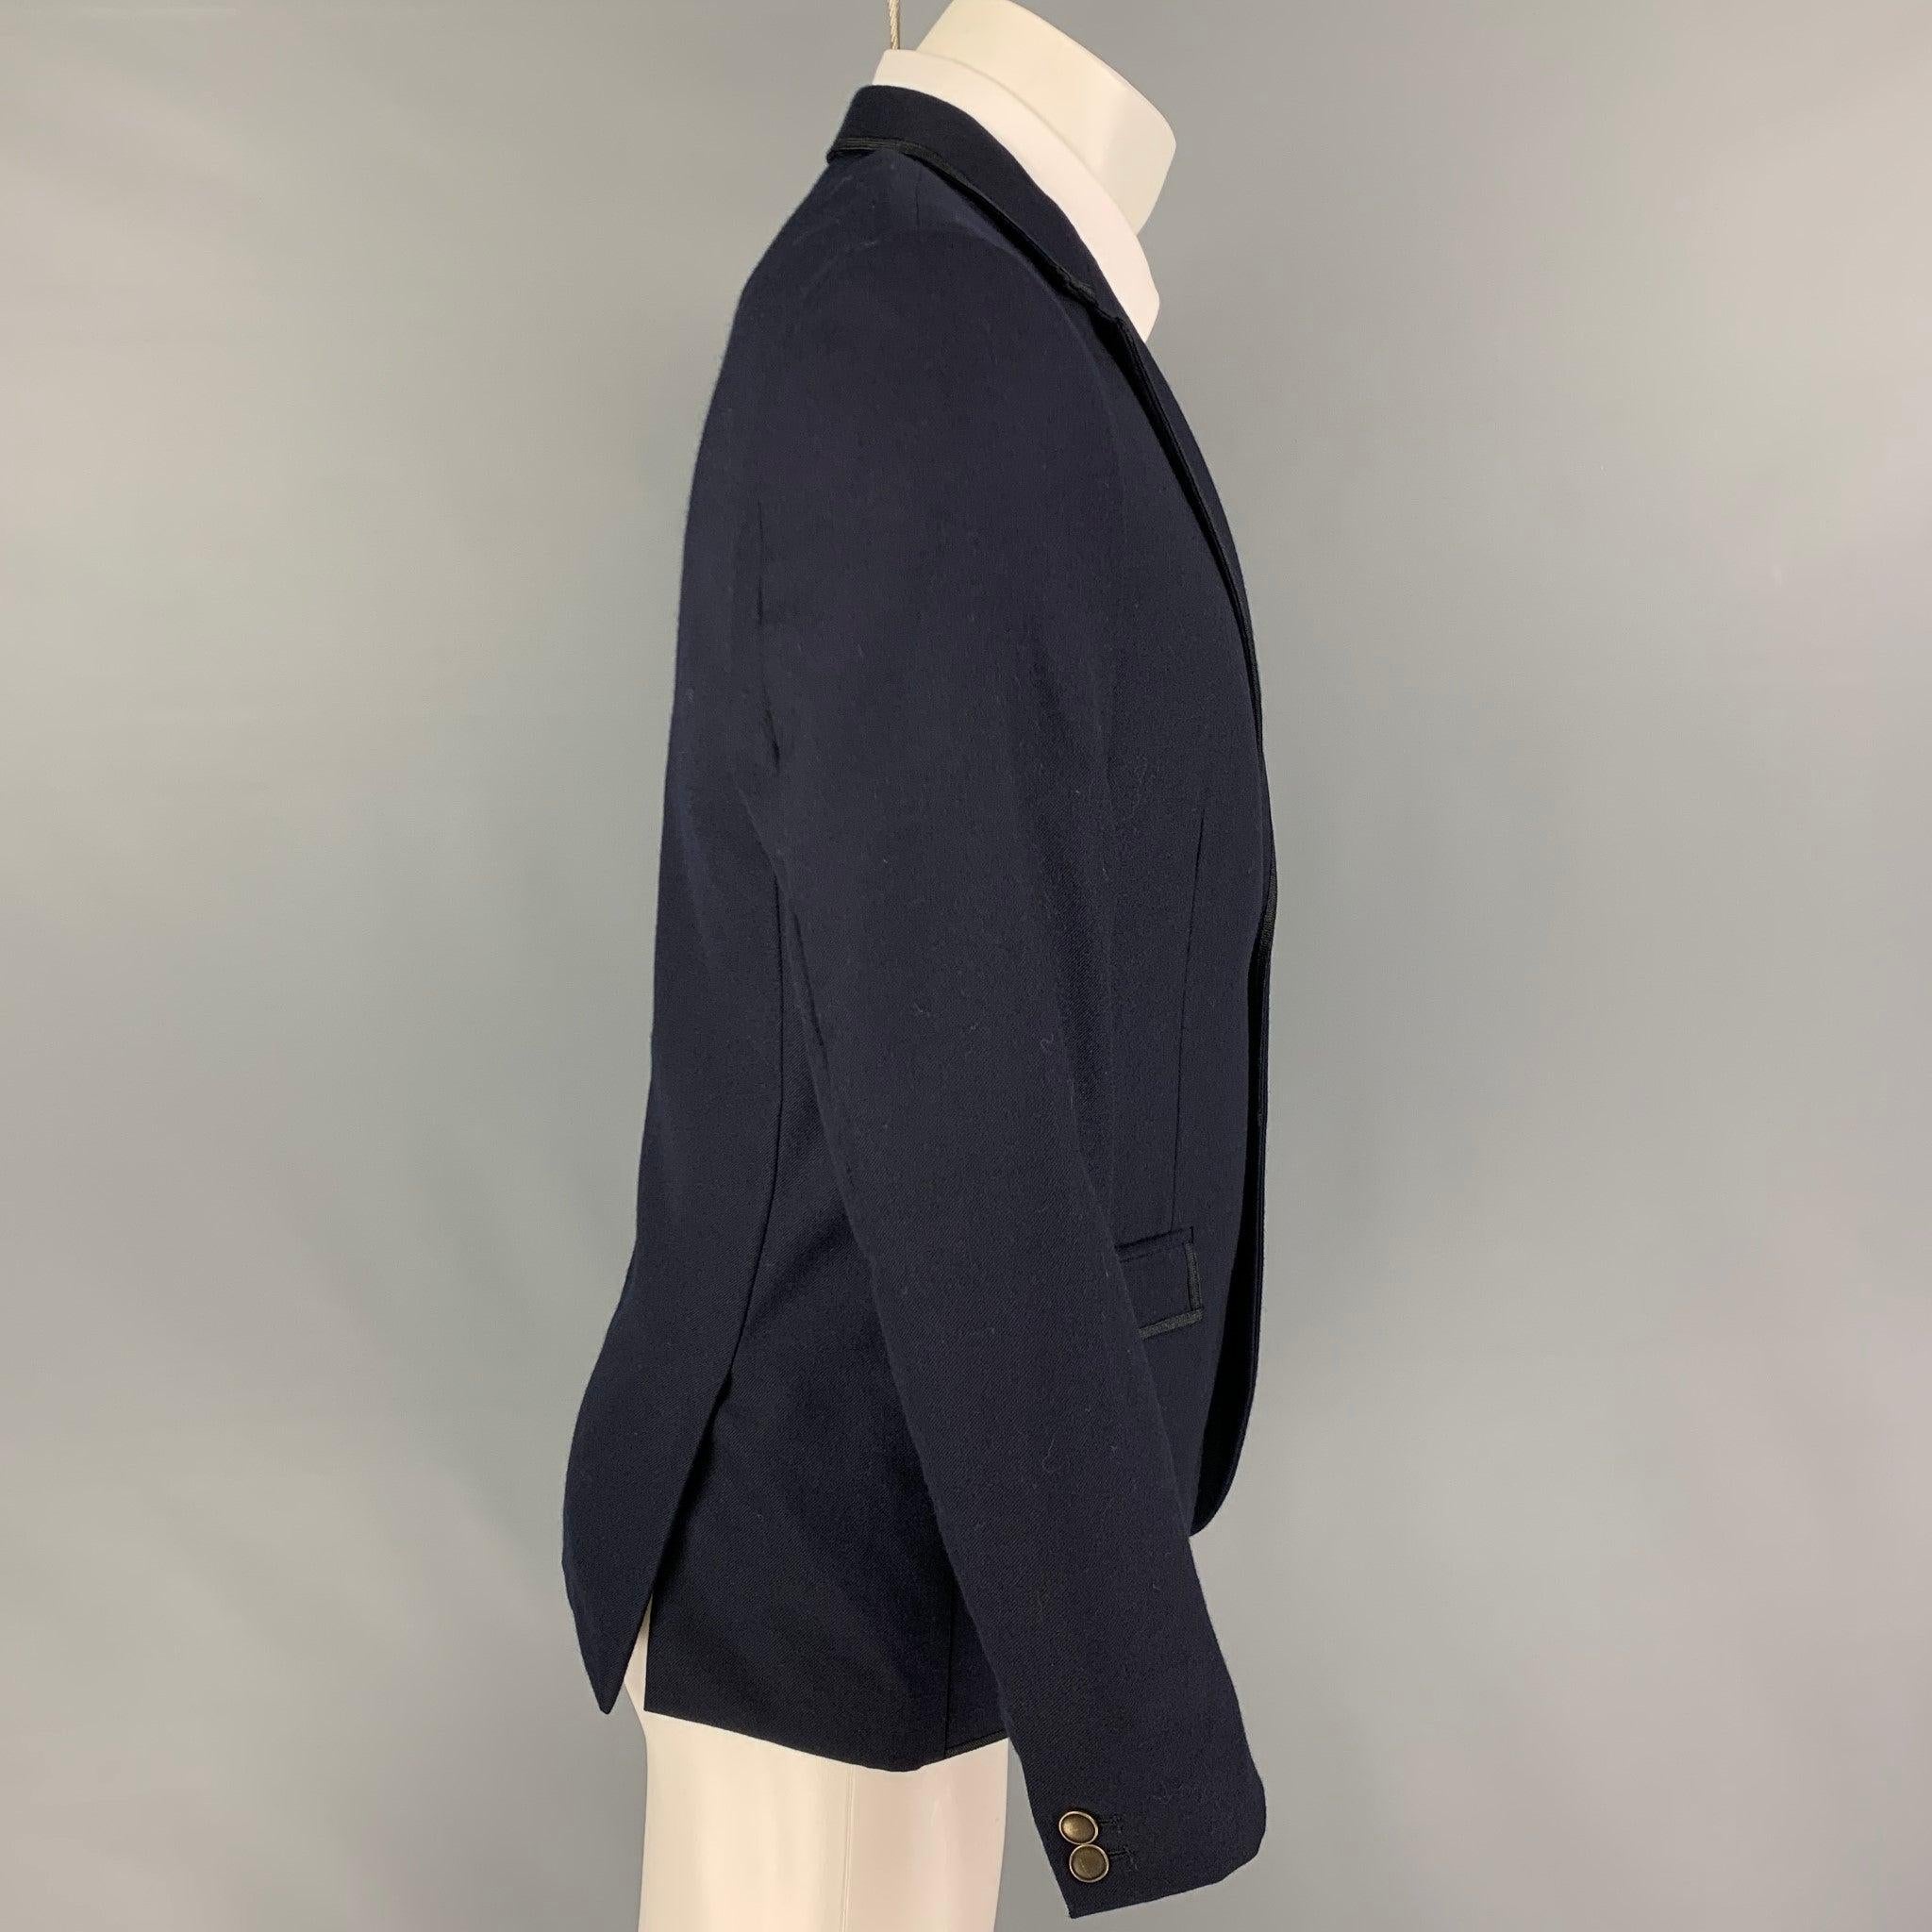 THE KOOPLES
sport coat comes in a navy wool with a full liner featuring a notch lapel, flap pockets, beaded skull head crest patch, double back vent, and a double button closure.Very Good Pre-Owned Condition.  

Marked:   48 

Measurements: 
